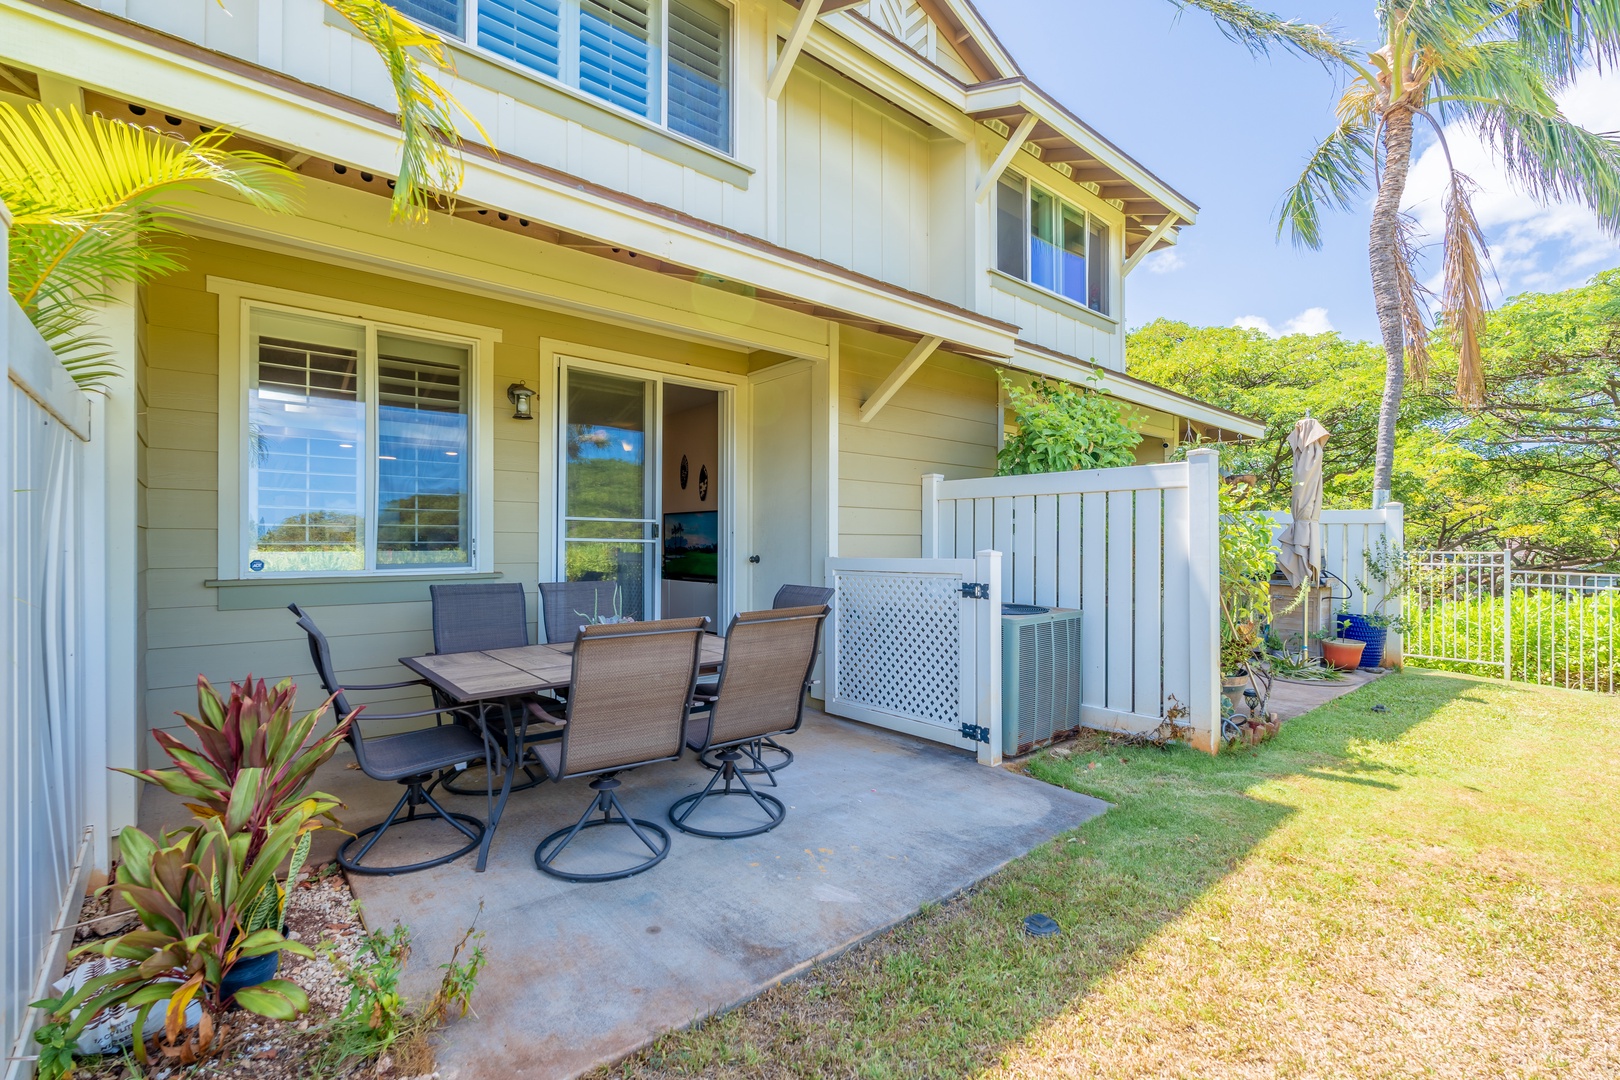 Kapolei Vacation Rentals, Hillside Villas 1496-2 - A picture of the manicured lawn and darling abode.